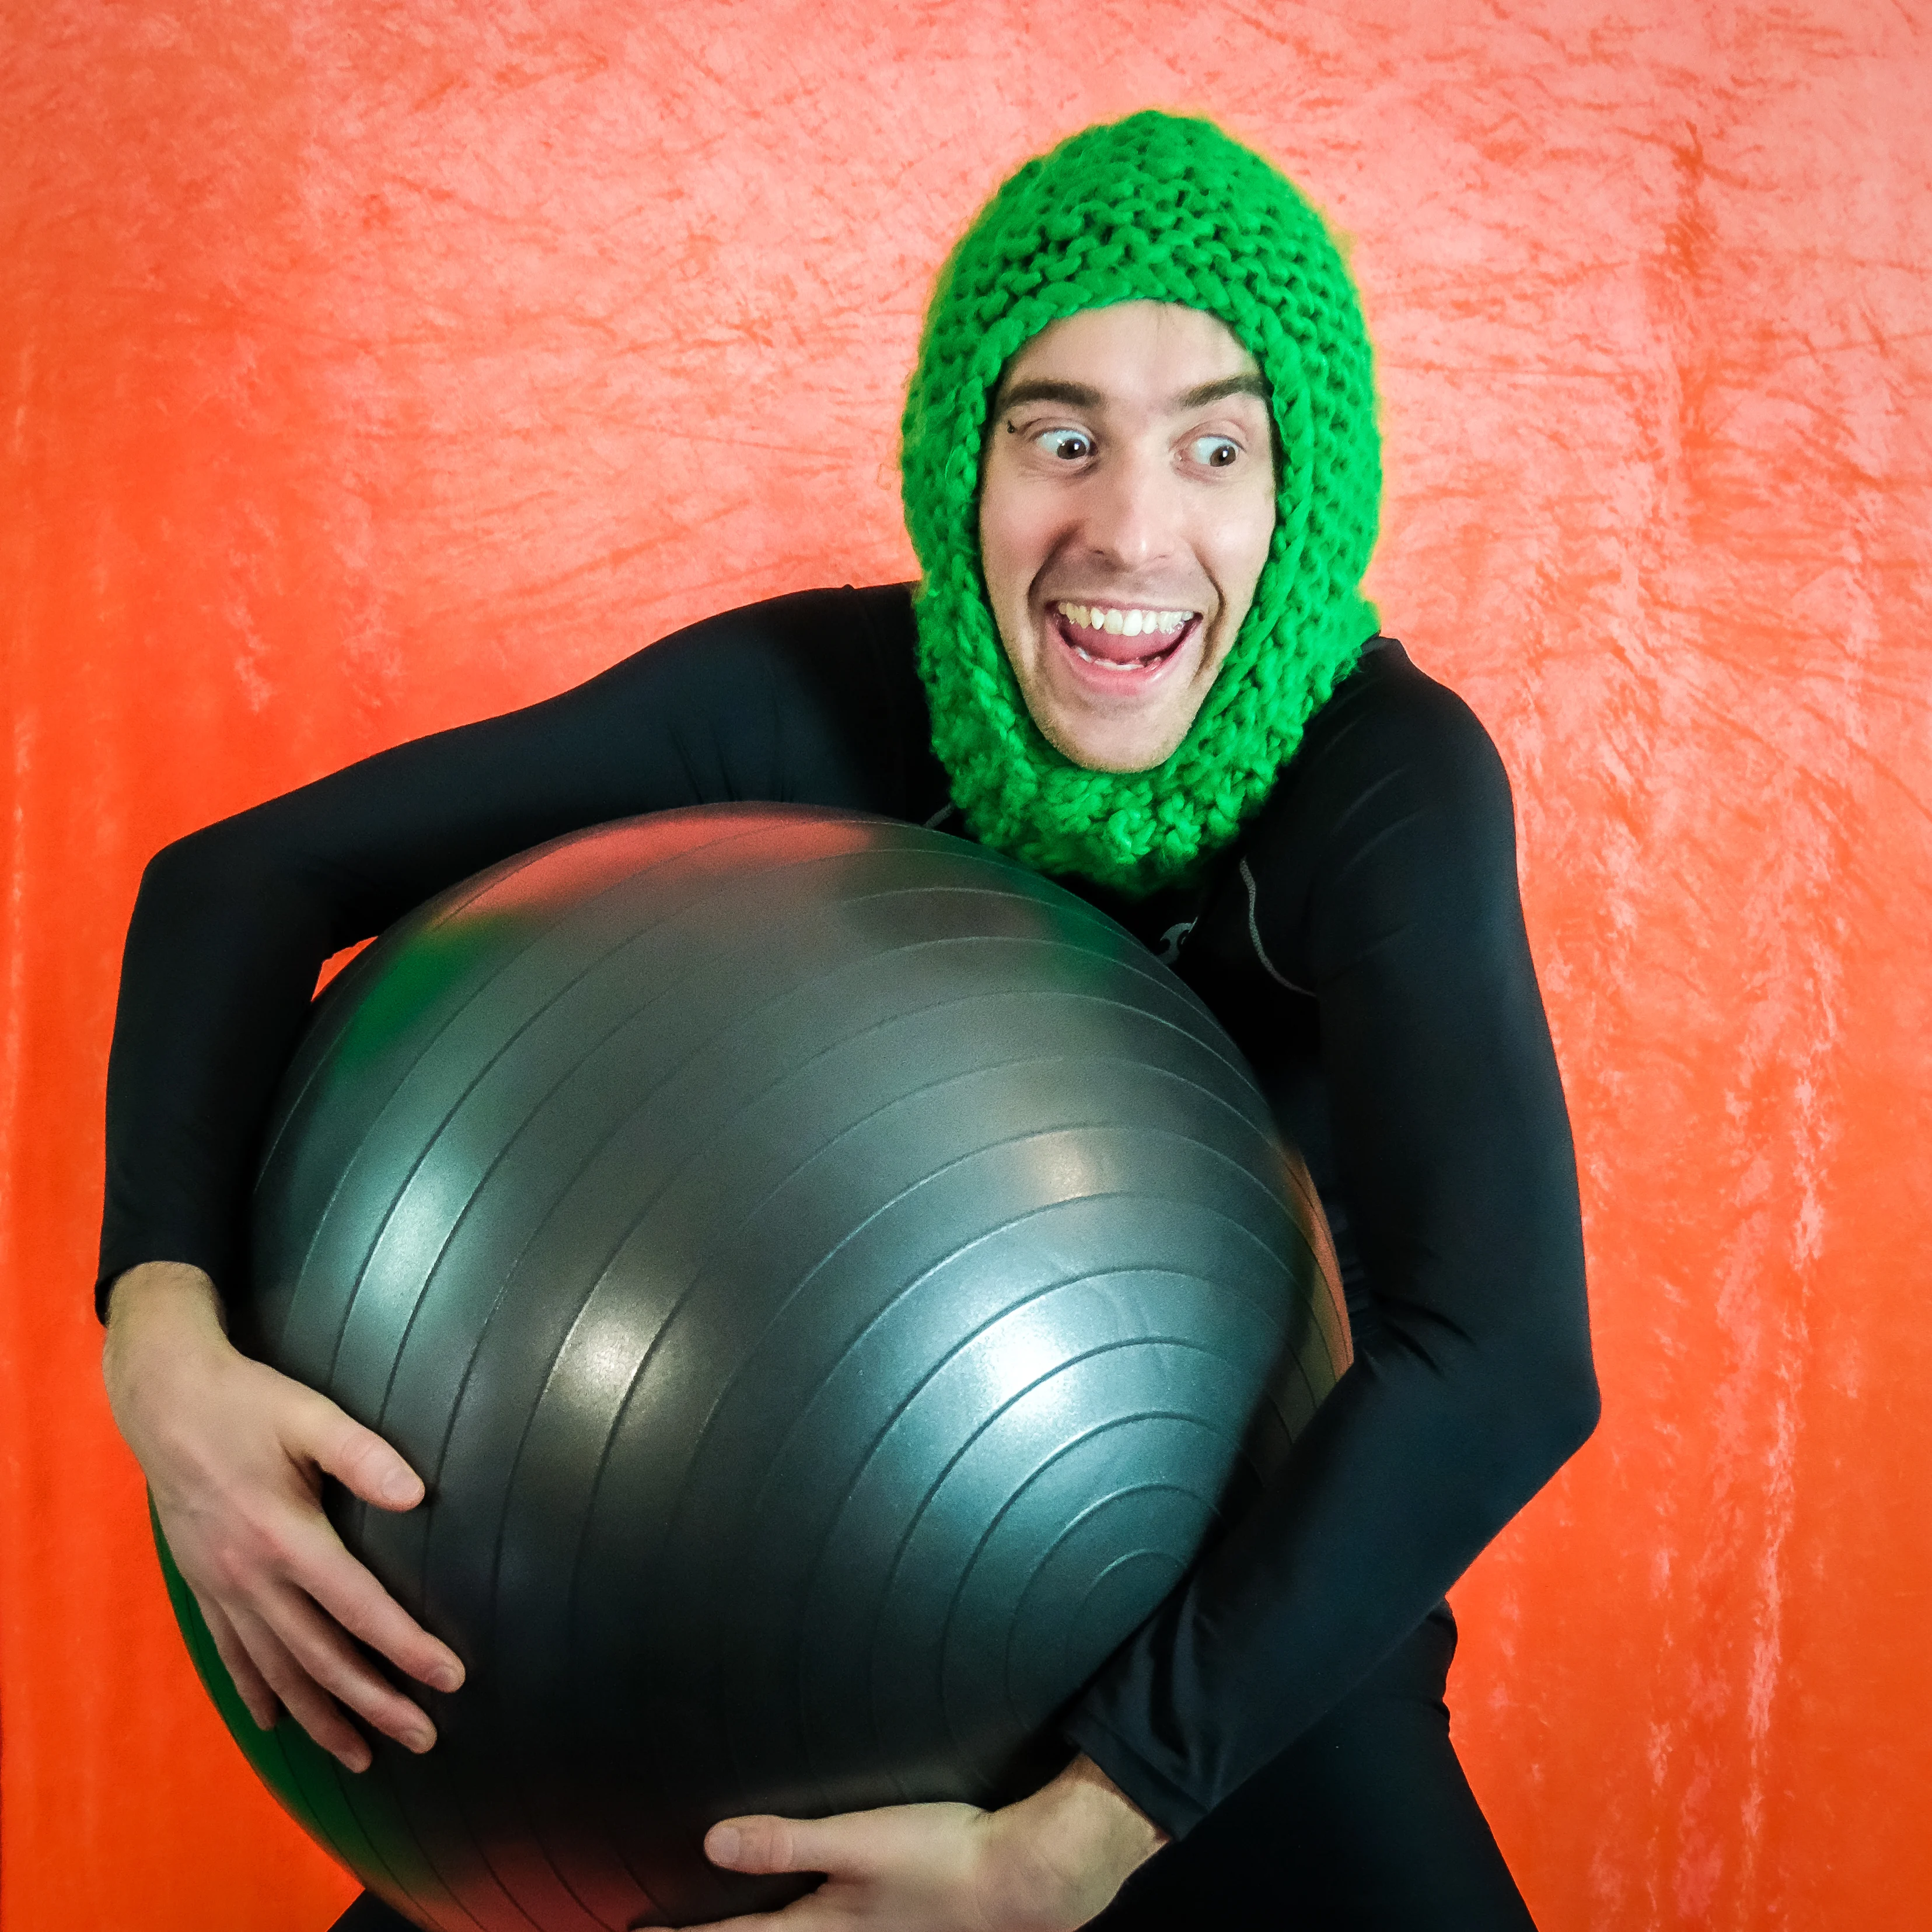 Charlie Jackson holding an exercise ball and wearing a knitted green hood. Otherwise he's dressed all in tight black. There's an orange background. He kinda looks like a goblin.